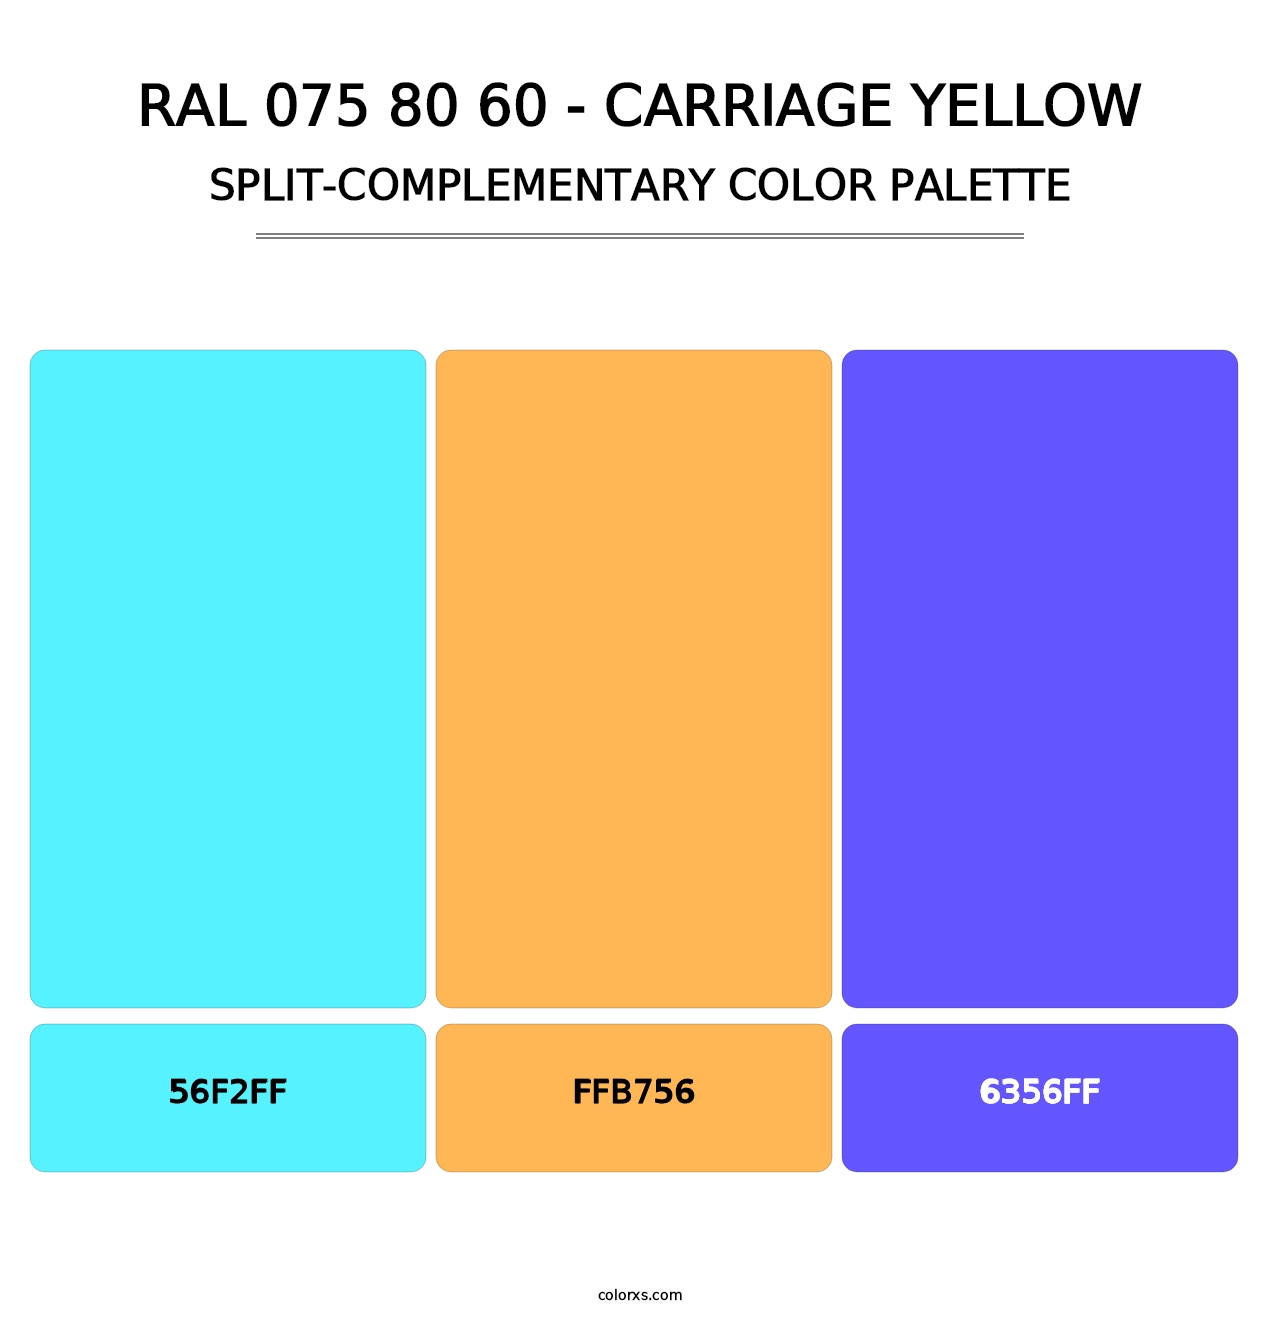 RAL 075 80 60 - Carriage Yellow - Split-Complementary Color Palette